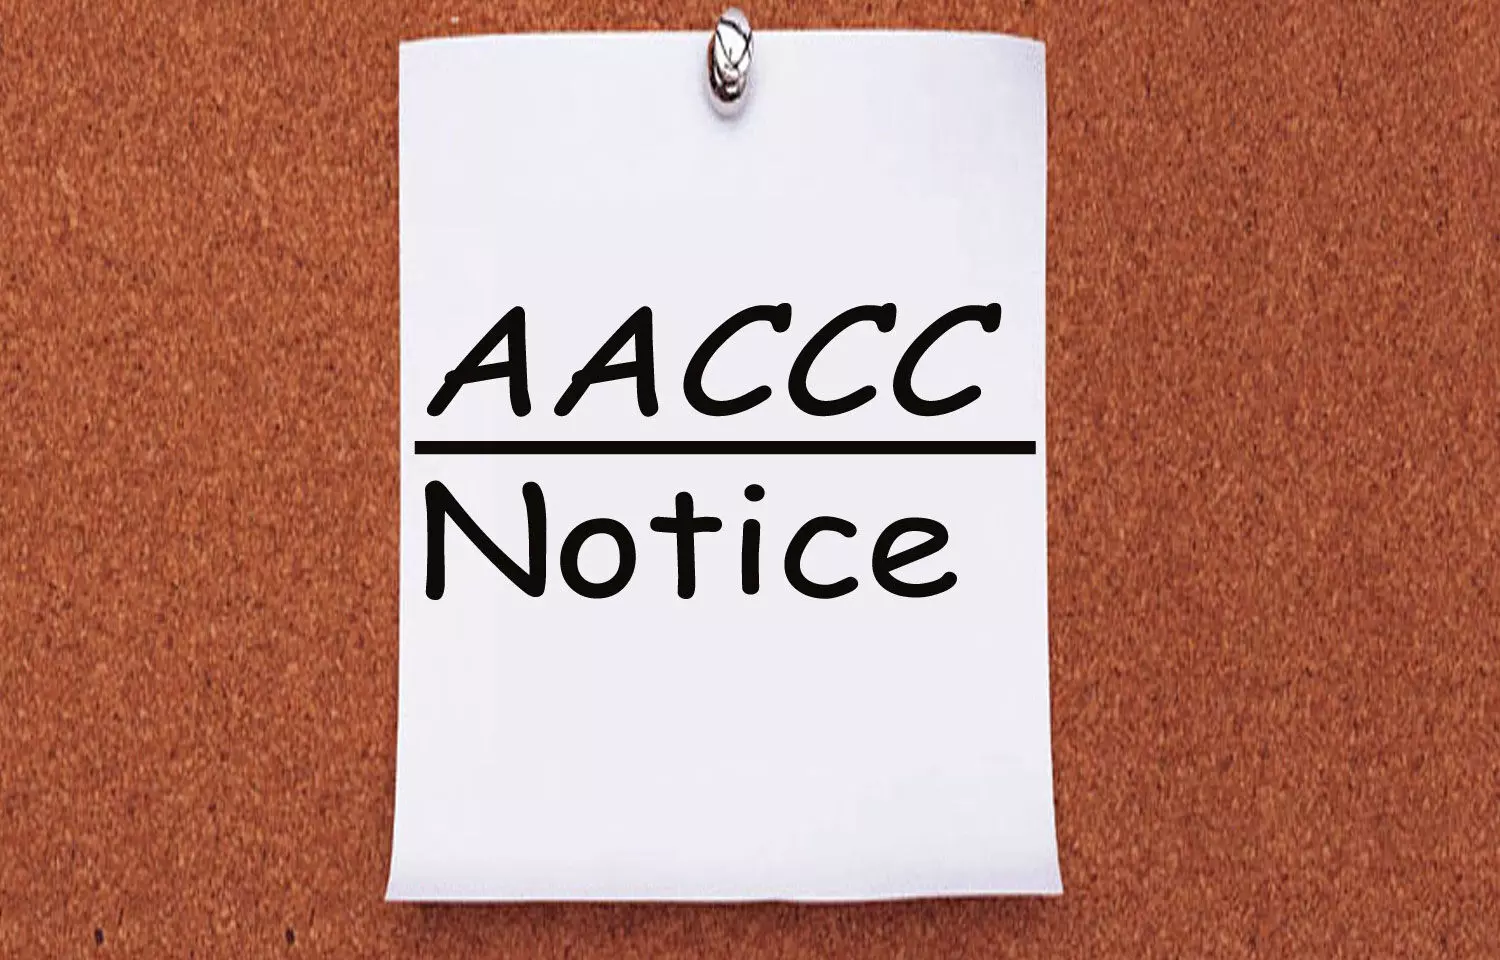 AACCC notifies on Password Policy for BAMS, BHMS, BUMS, BSMS candidates